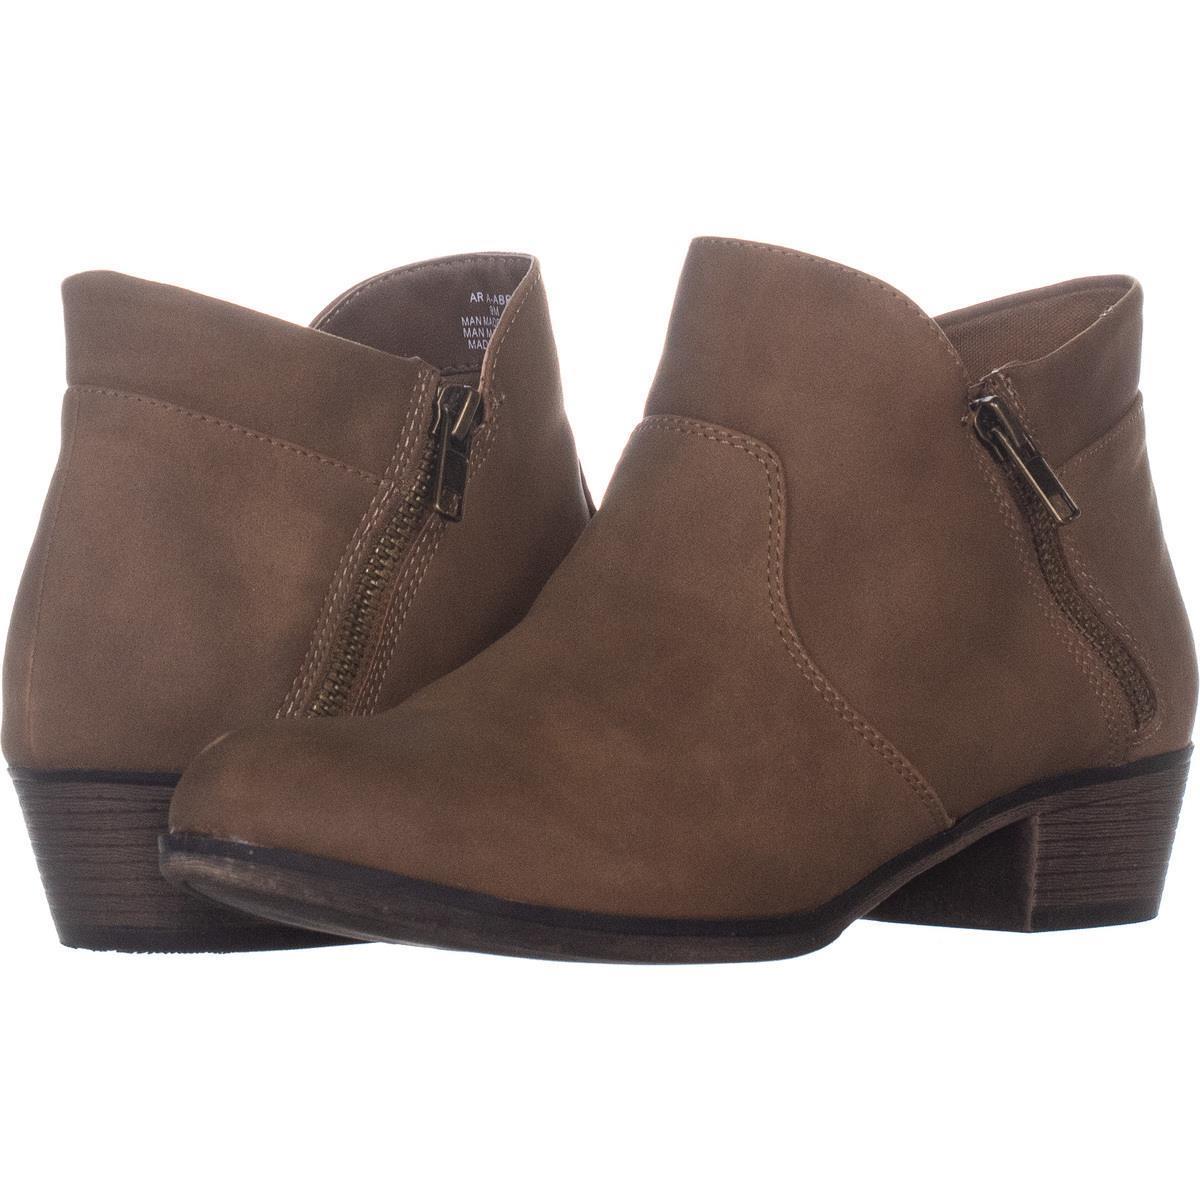 AR35 Abby Side Zip Short Ankle Boots 489, Tan, 9 US - Boots